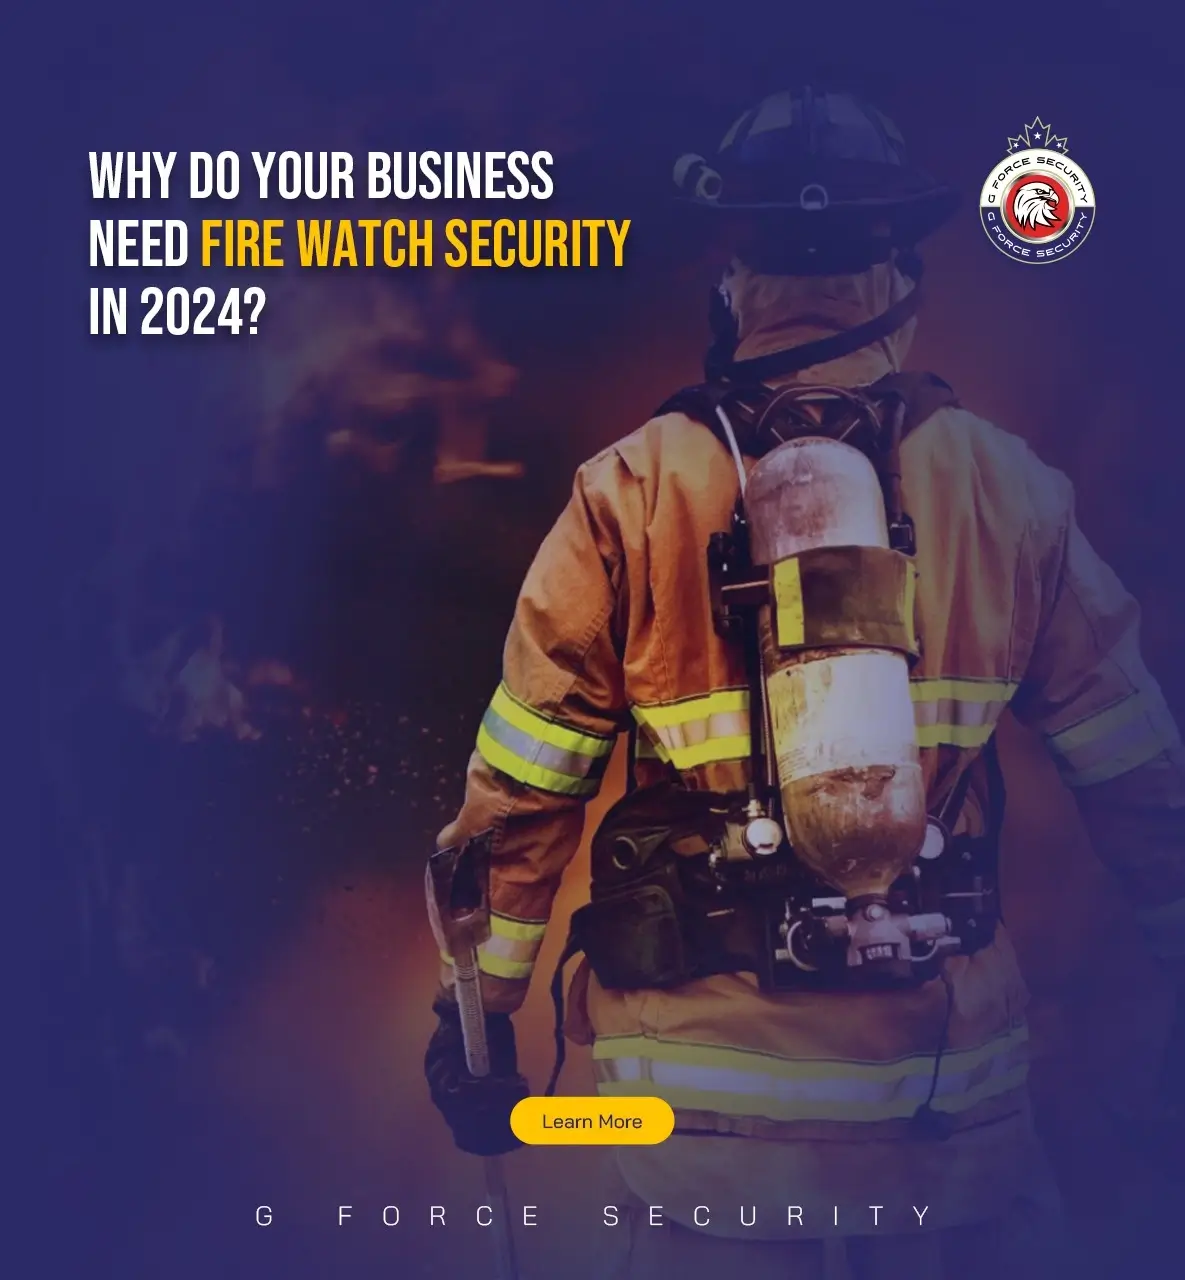 Why Does Your Business Need Fire Watch Security in 2024?